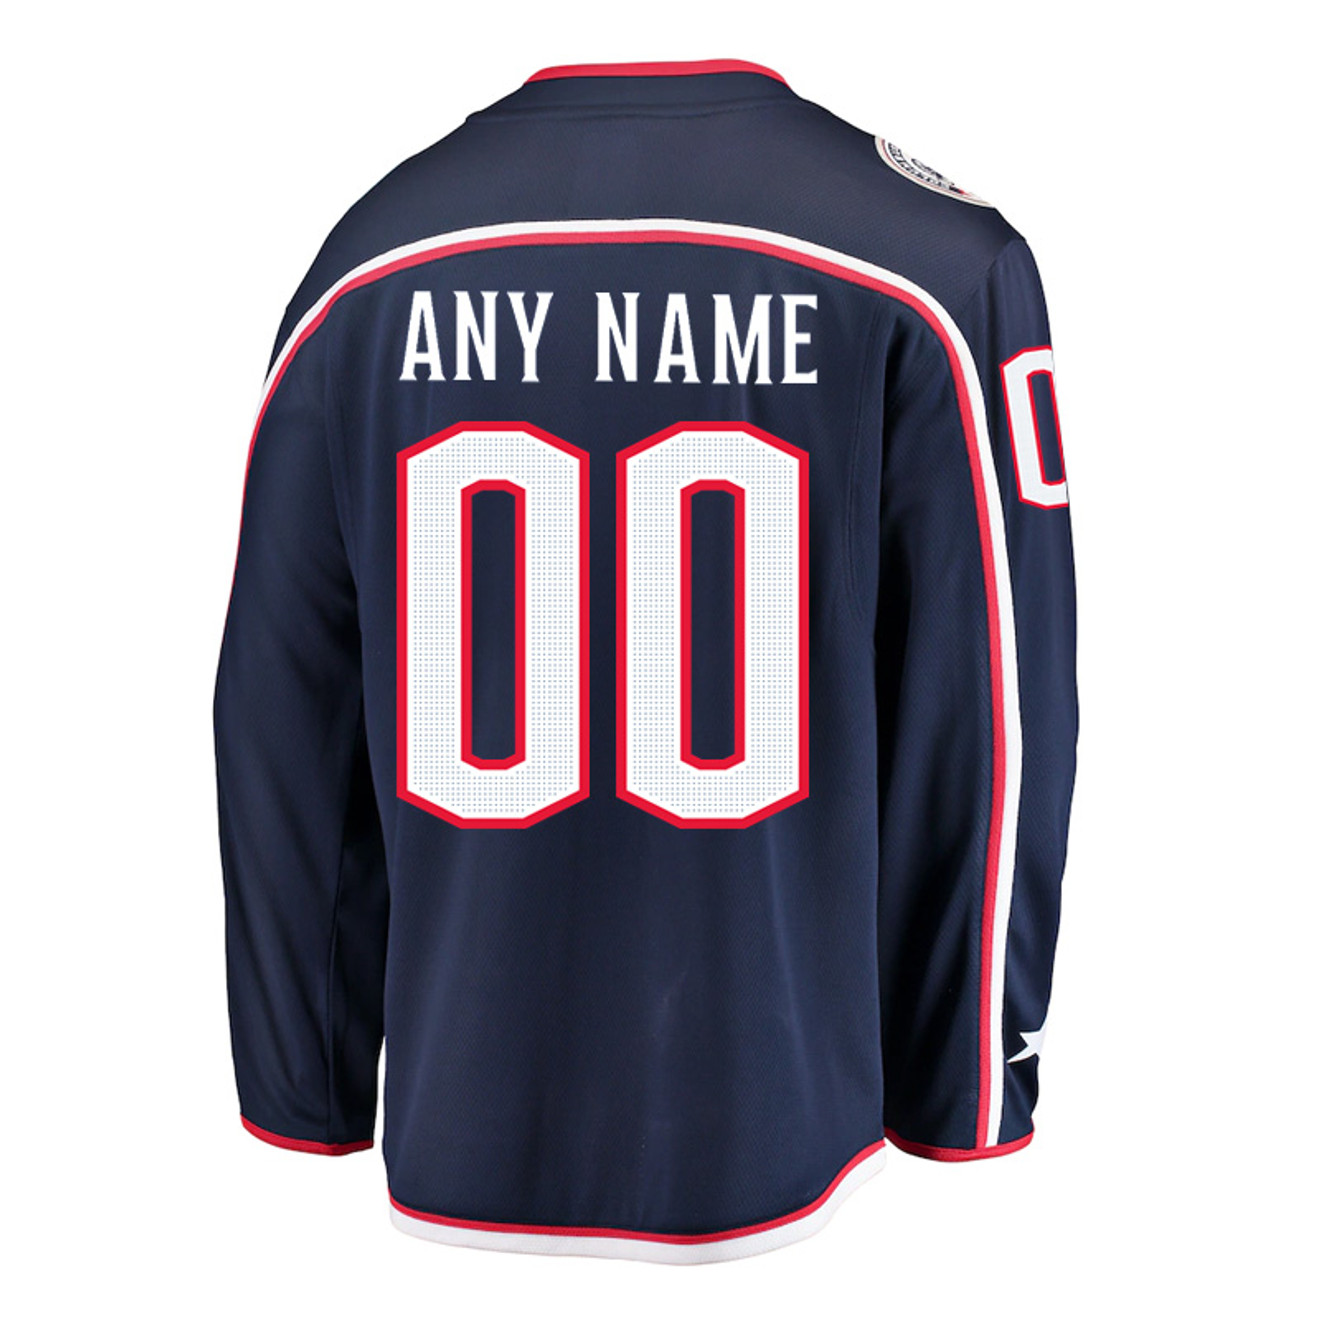  Custom Hockey Jersey Personalized Any Name Number Fans Gifts  Hockey Team Jerseys for Men Women Youth Kids : Clothing, Shoes & Jewelry